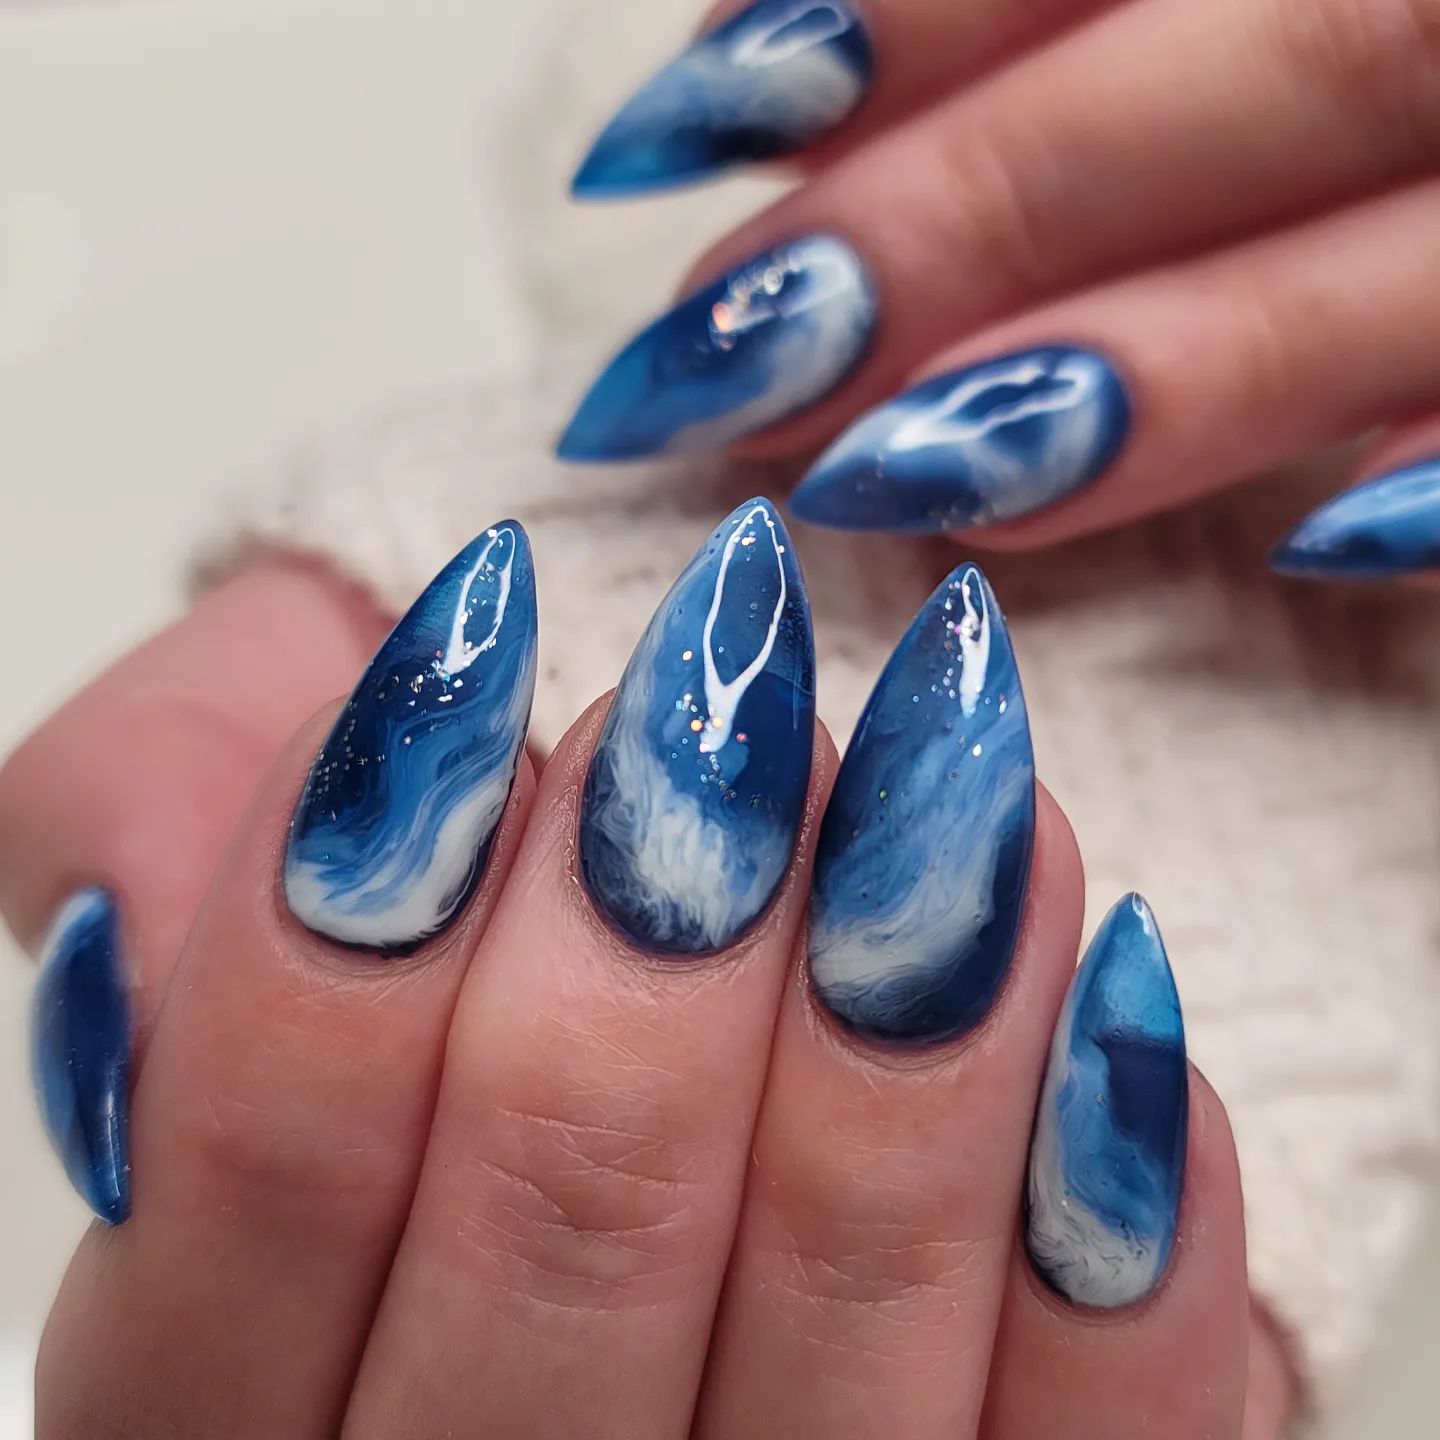 Is there a more relaxing thing than listening to the waves of a sea or an ocean? If the answer is 'no' for you, you should show these waves on stiletto your nails.